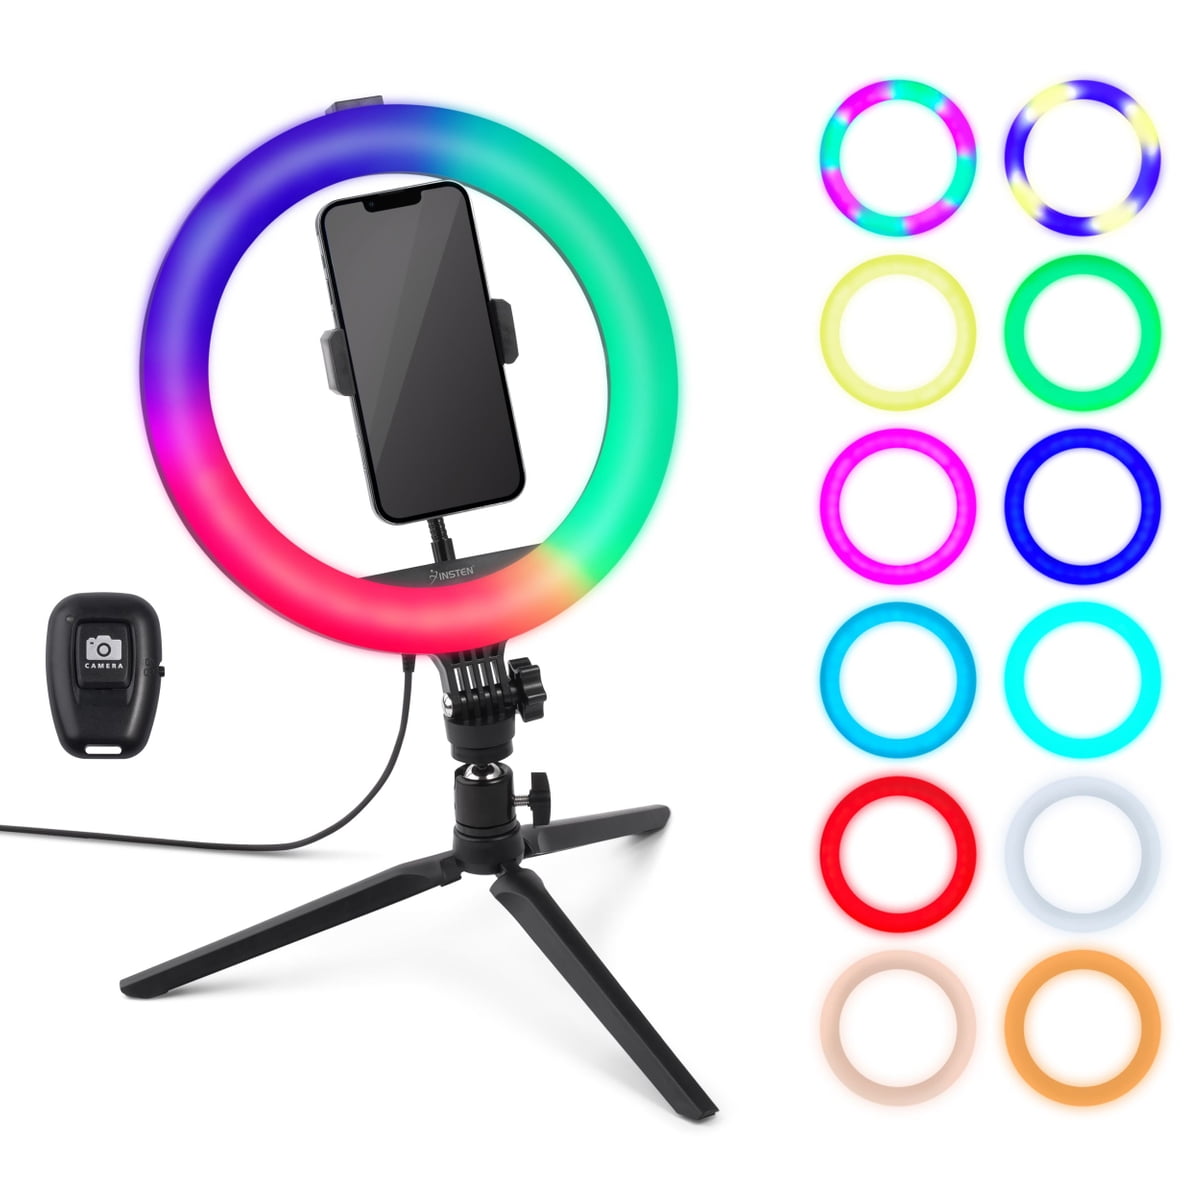 YouTube Video TikTok Compatible for iPhone and Android Phone Photography 10 Selfie Ring Light with Adjustable Tripod Stand Bluetooth Remote Control Flexible Cell Phone Holder for Live Stream 